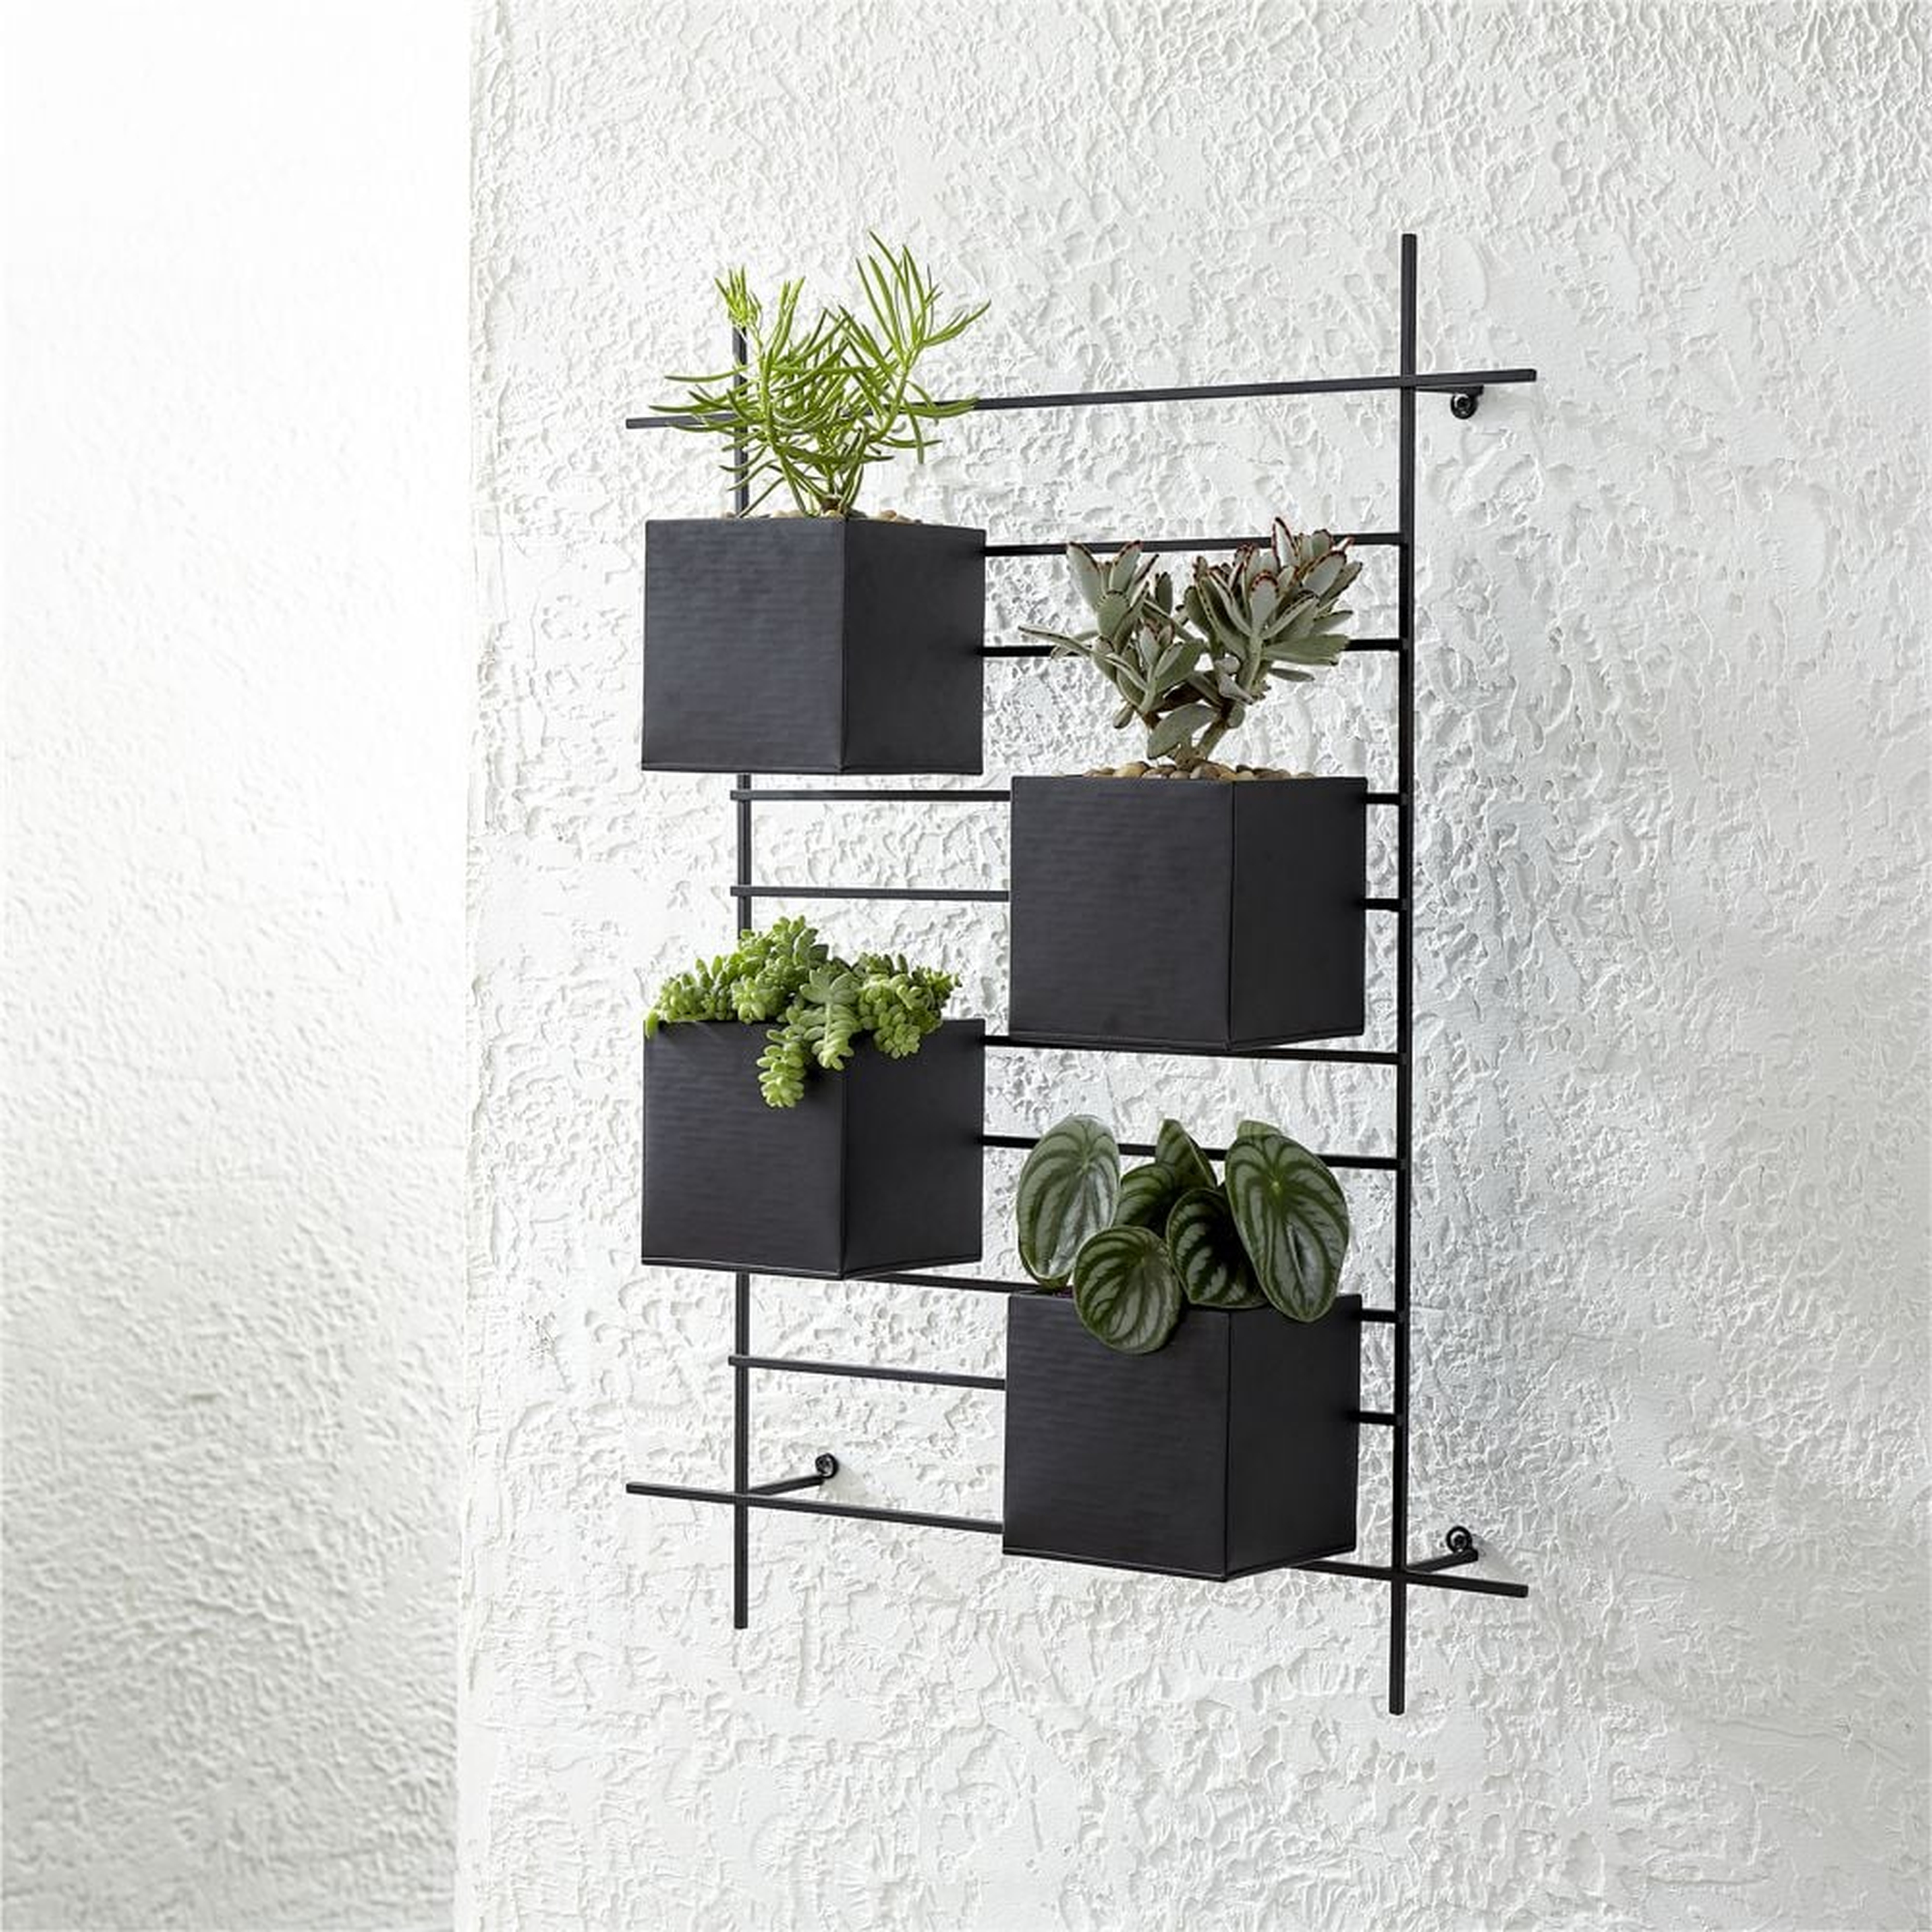 4 Box Wall Mounted Planter - Crate and Barrel